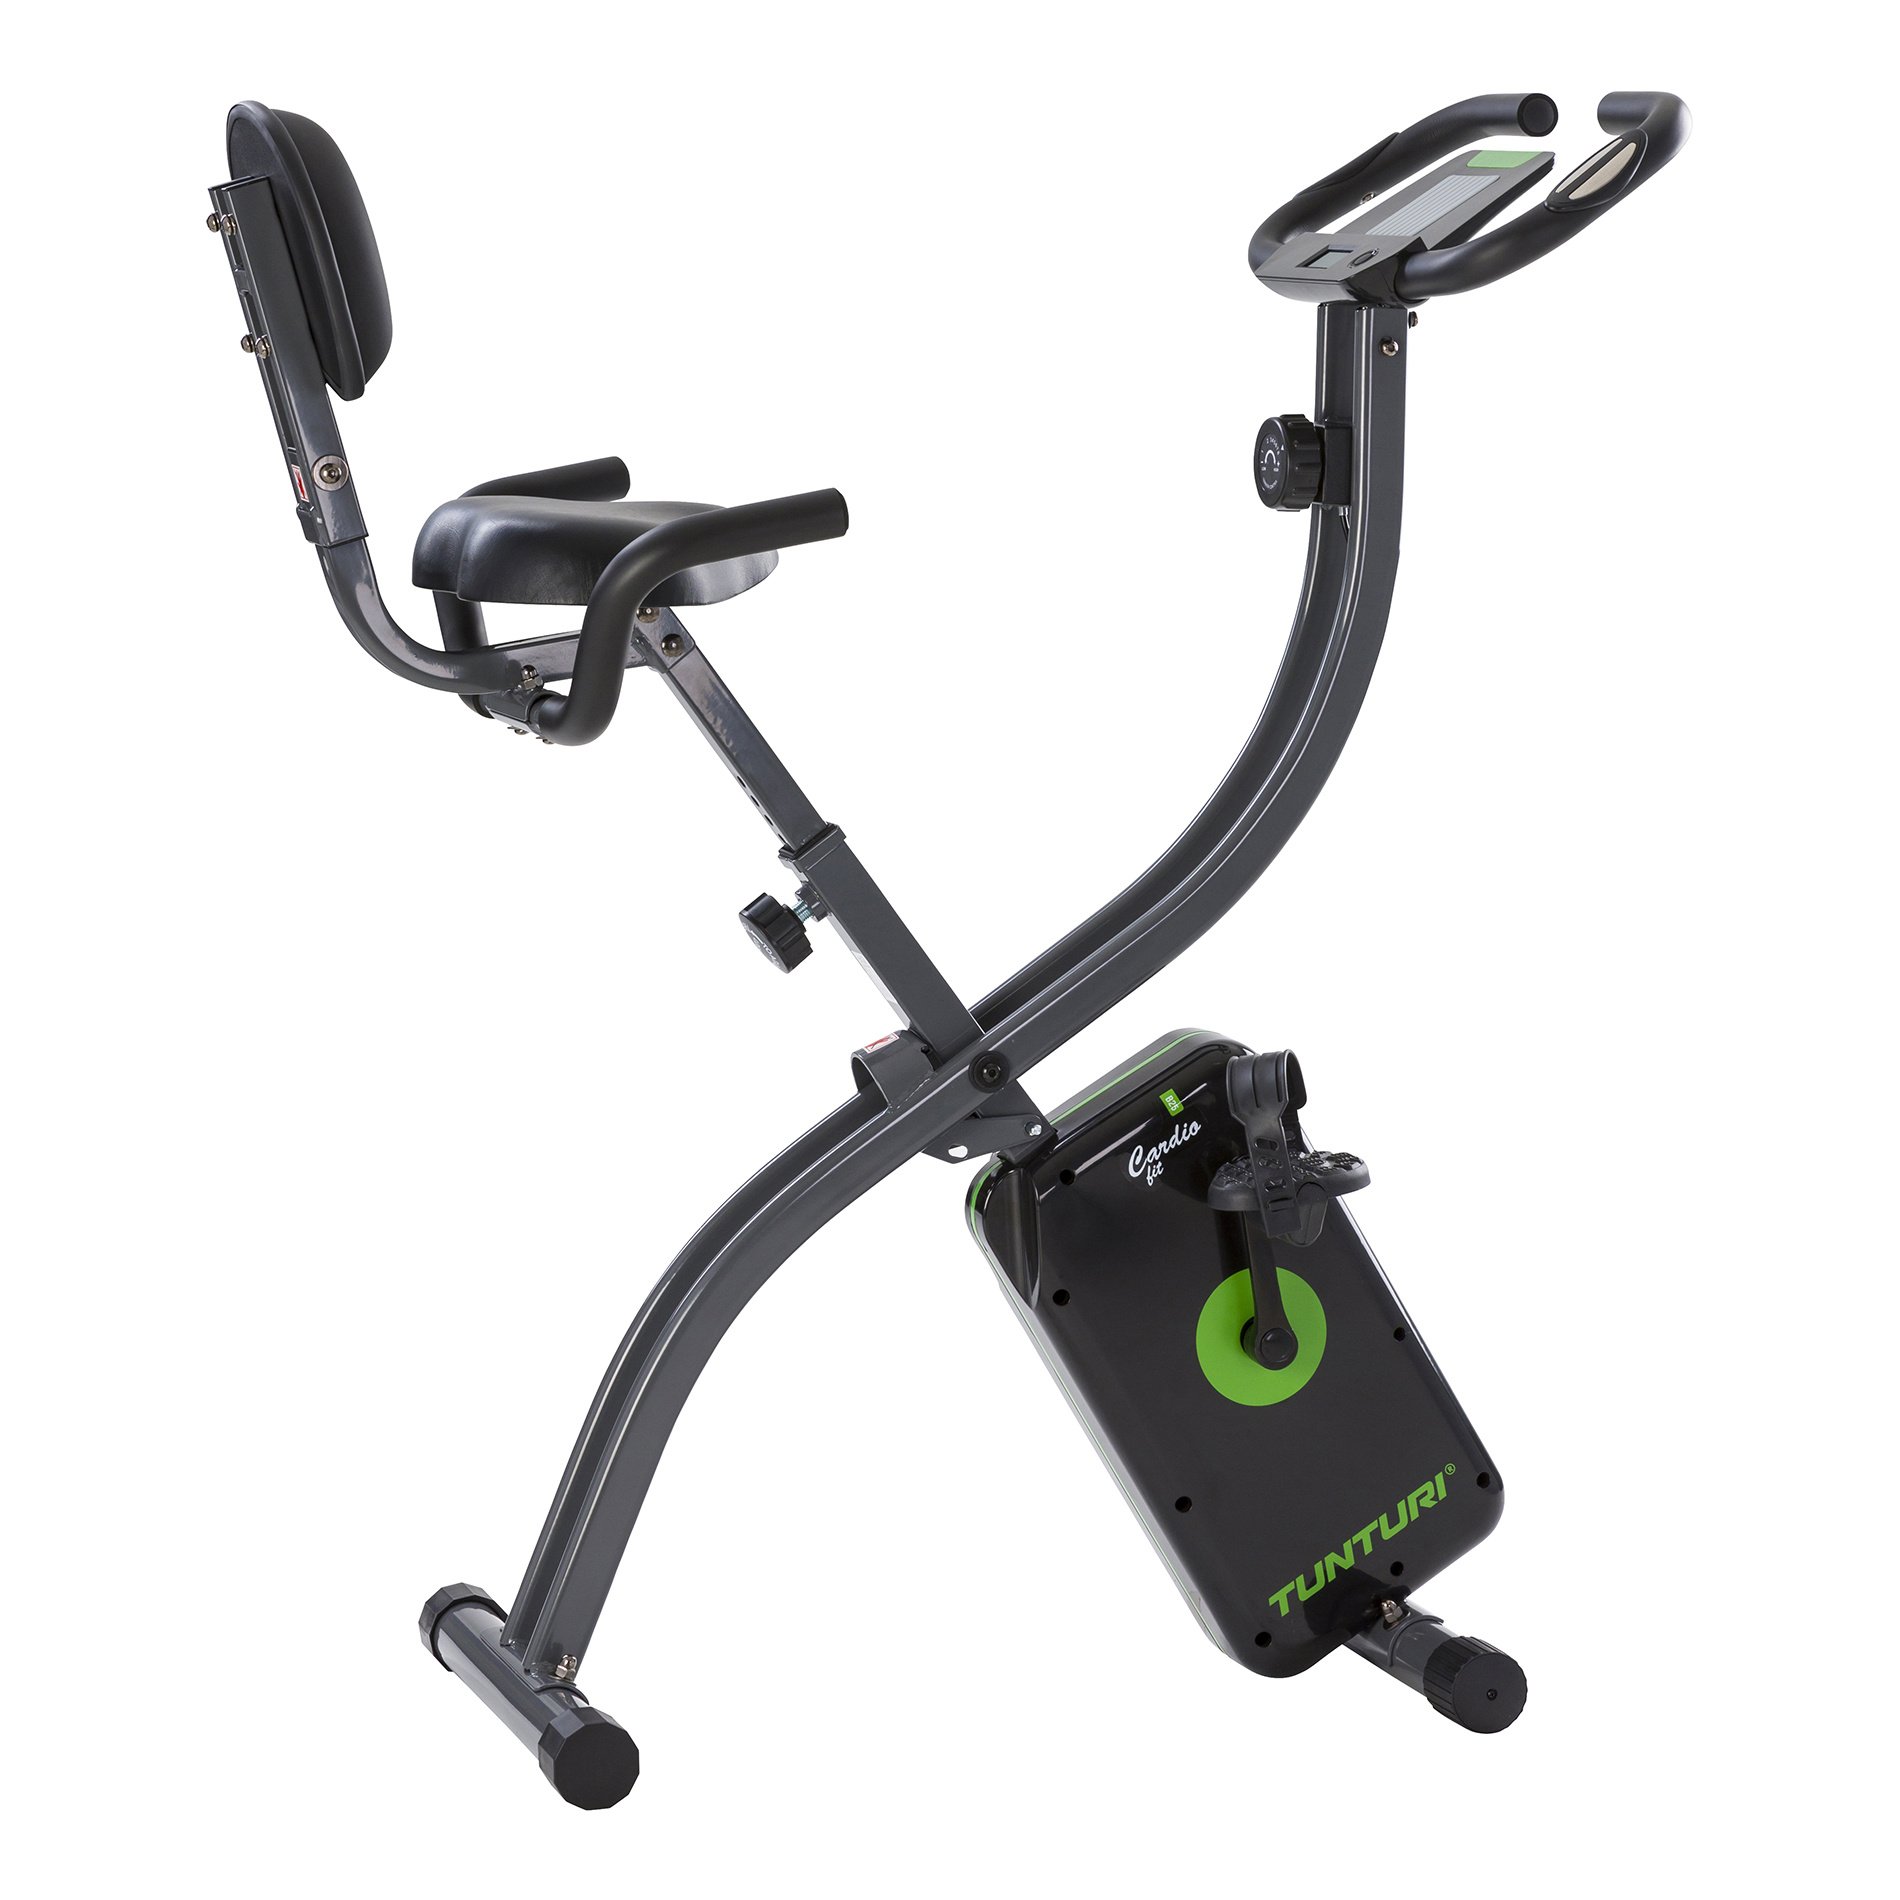 exercise bike with back